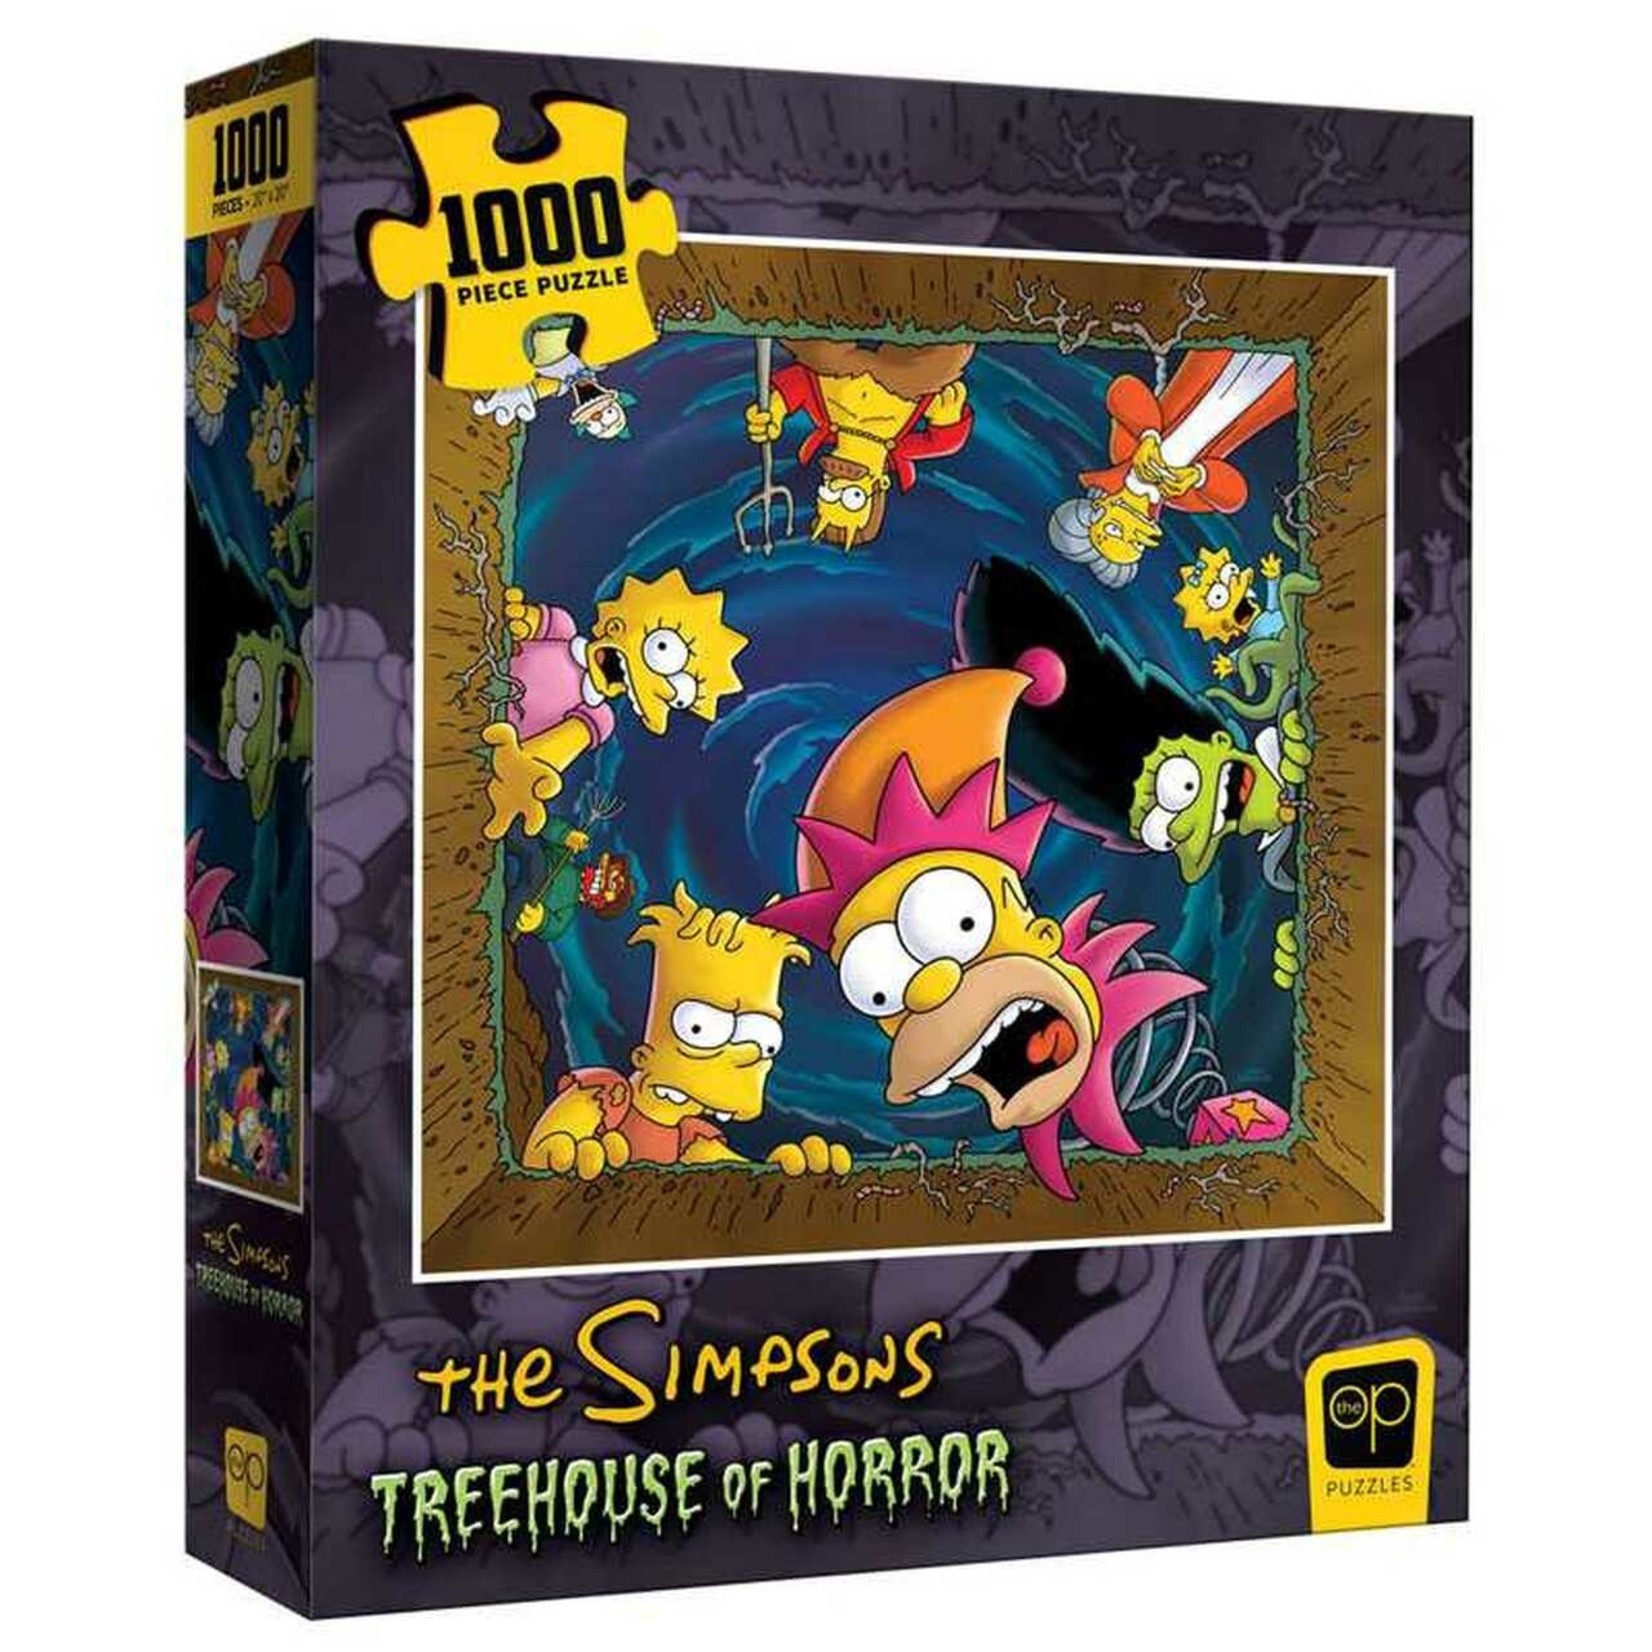 USAopoly 1000 pc Puzzle The Simpsons Tree House of Horror Happy Haunting